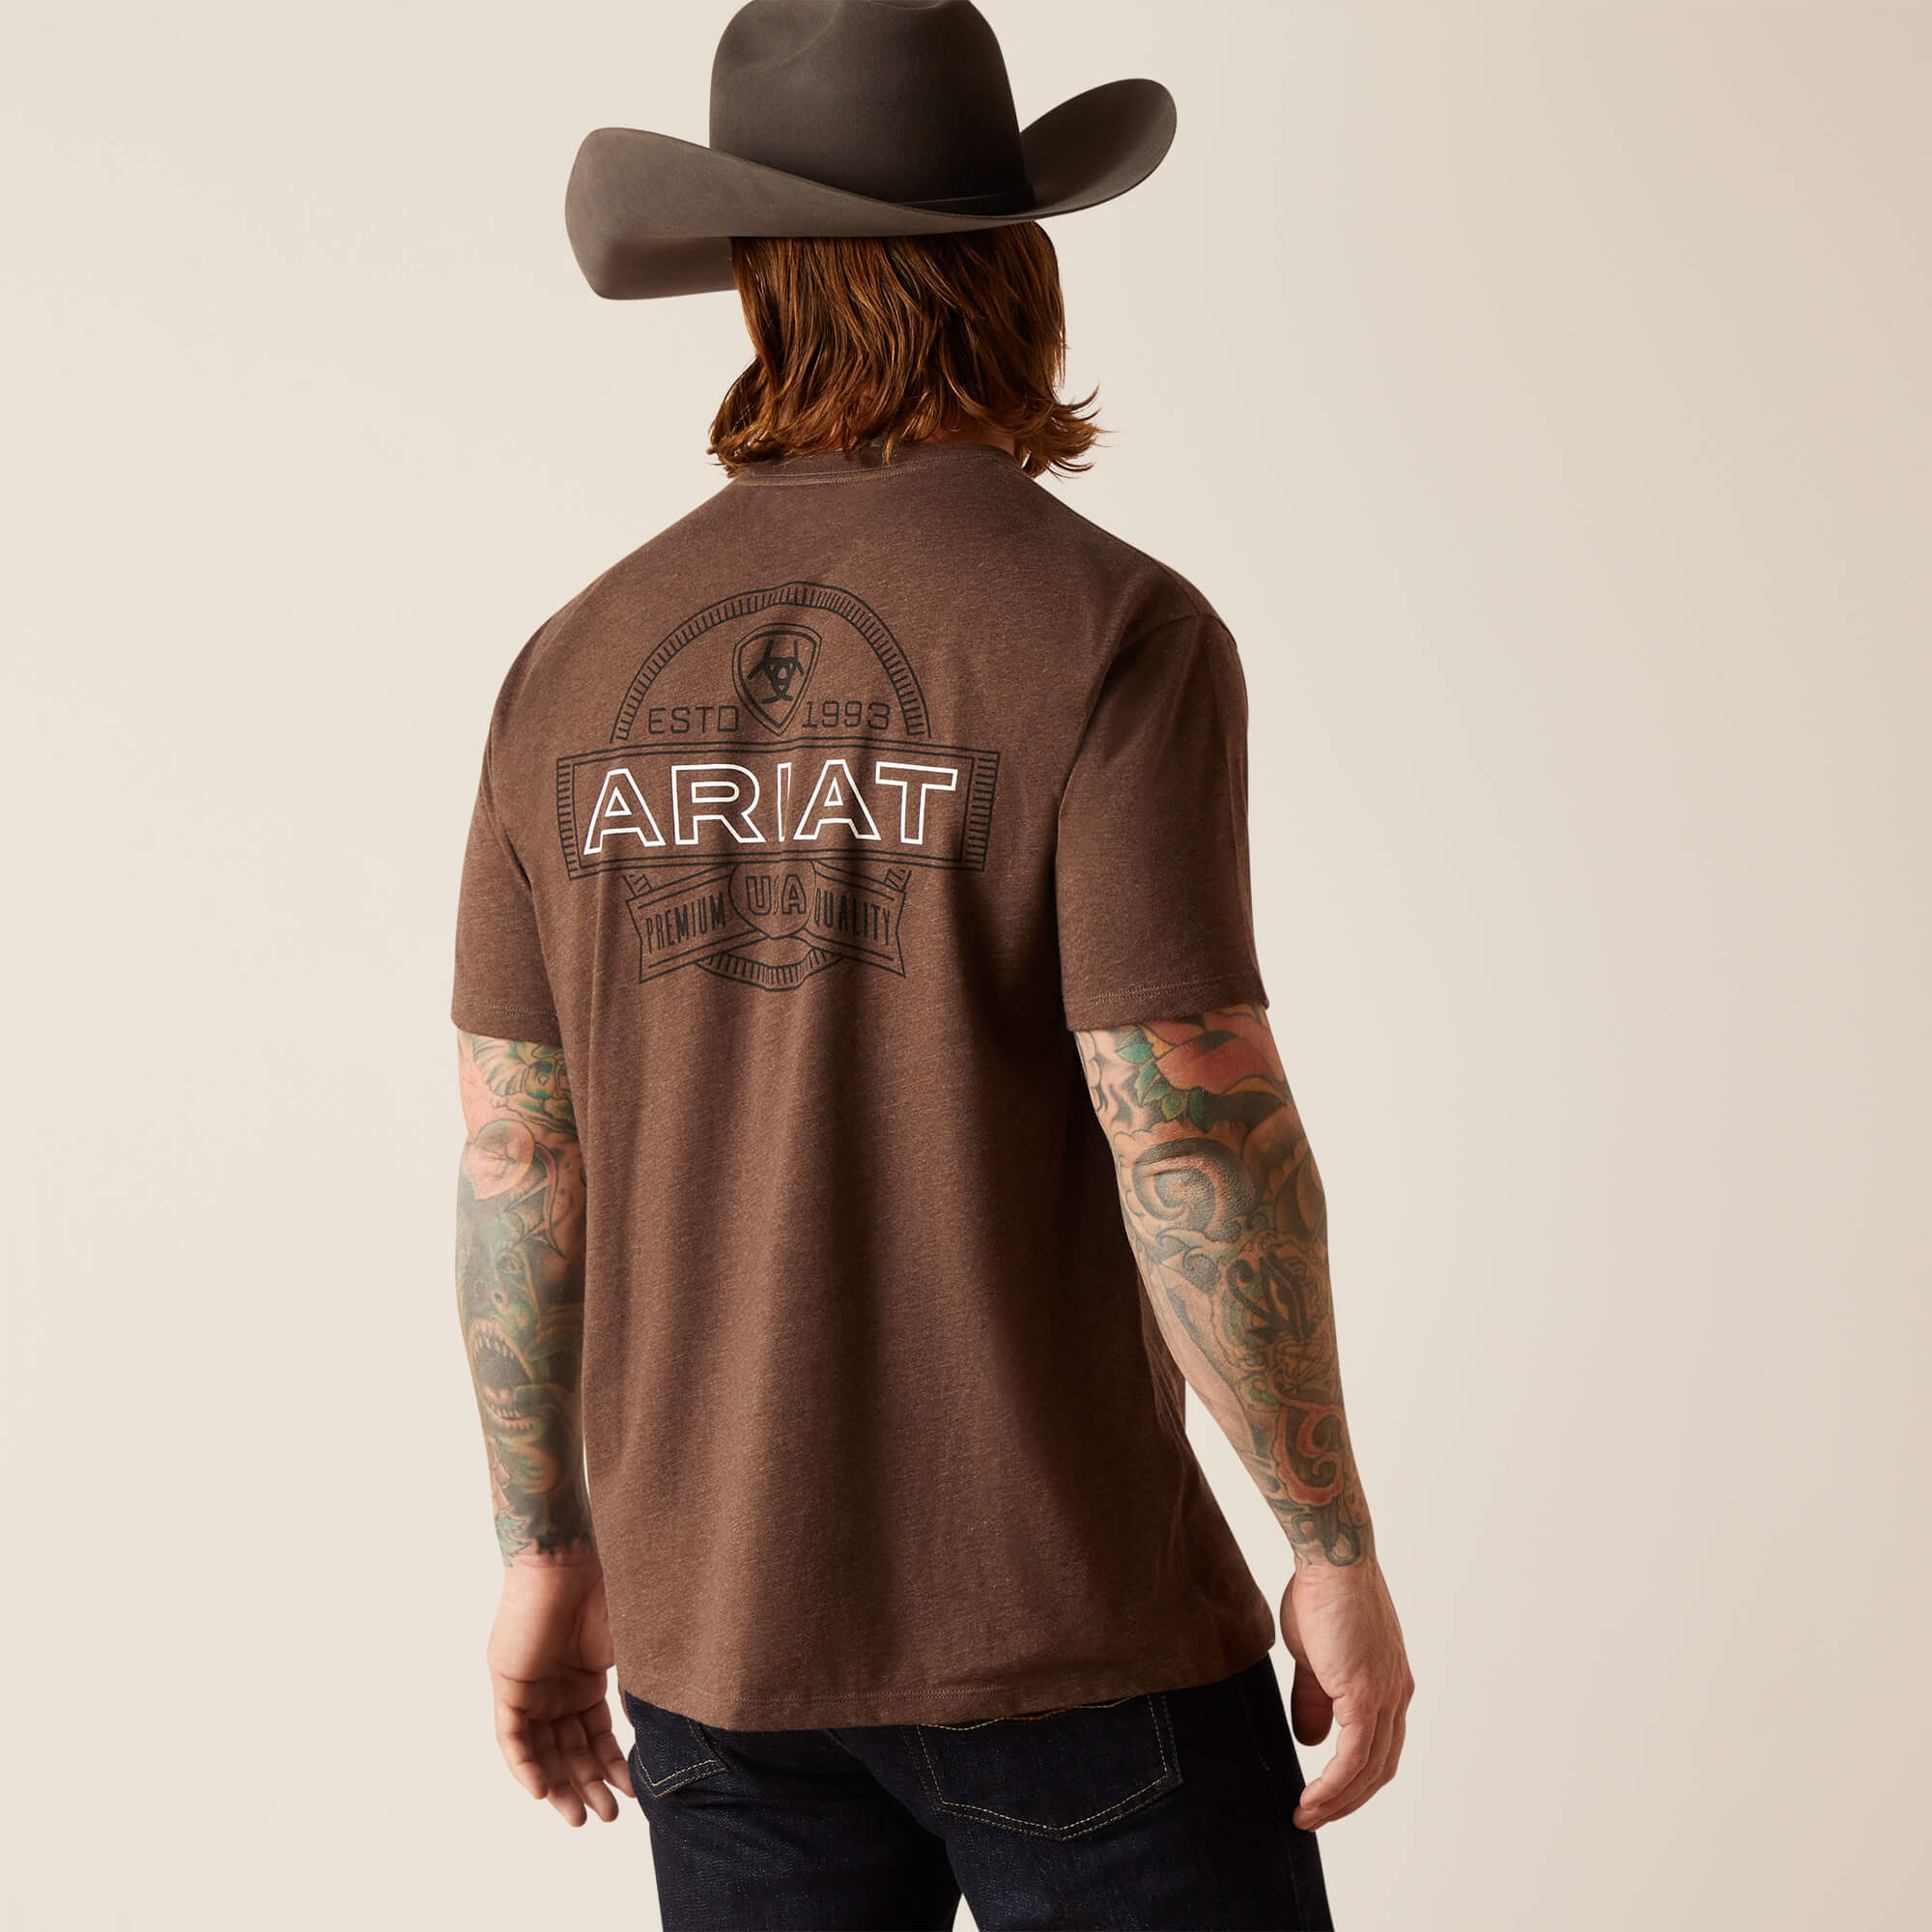 Ariat Mens Outline Circle Short Sleeve T-Shirt (Brown Heather)